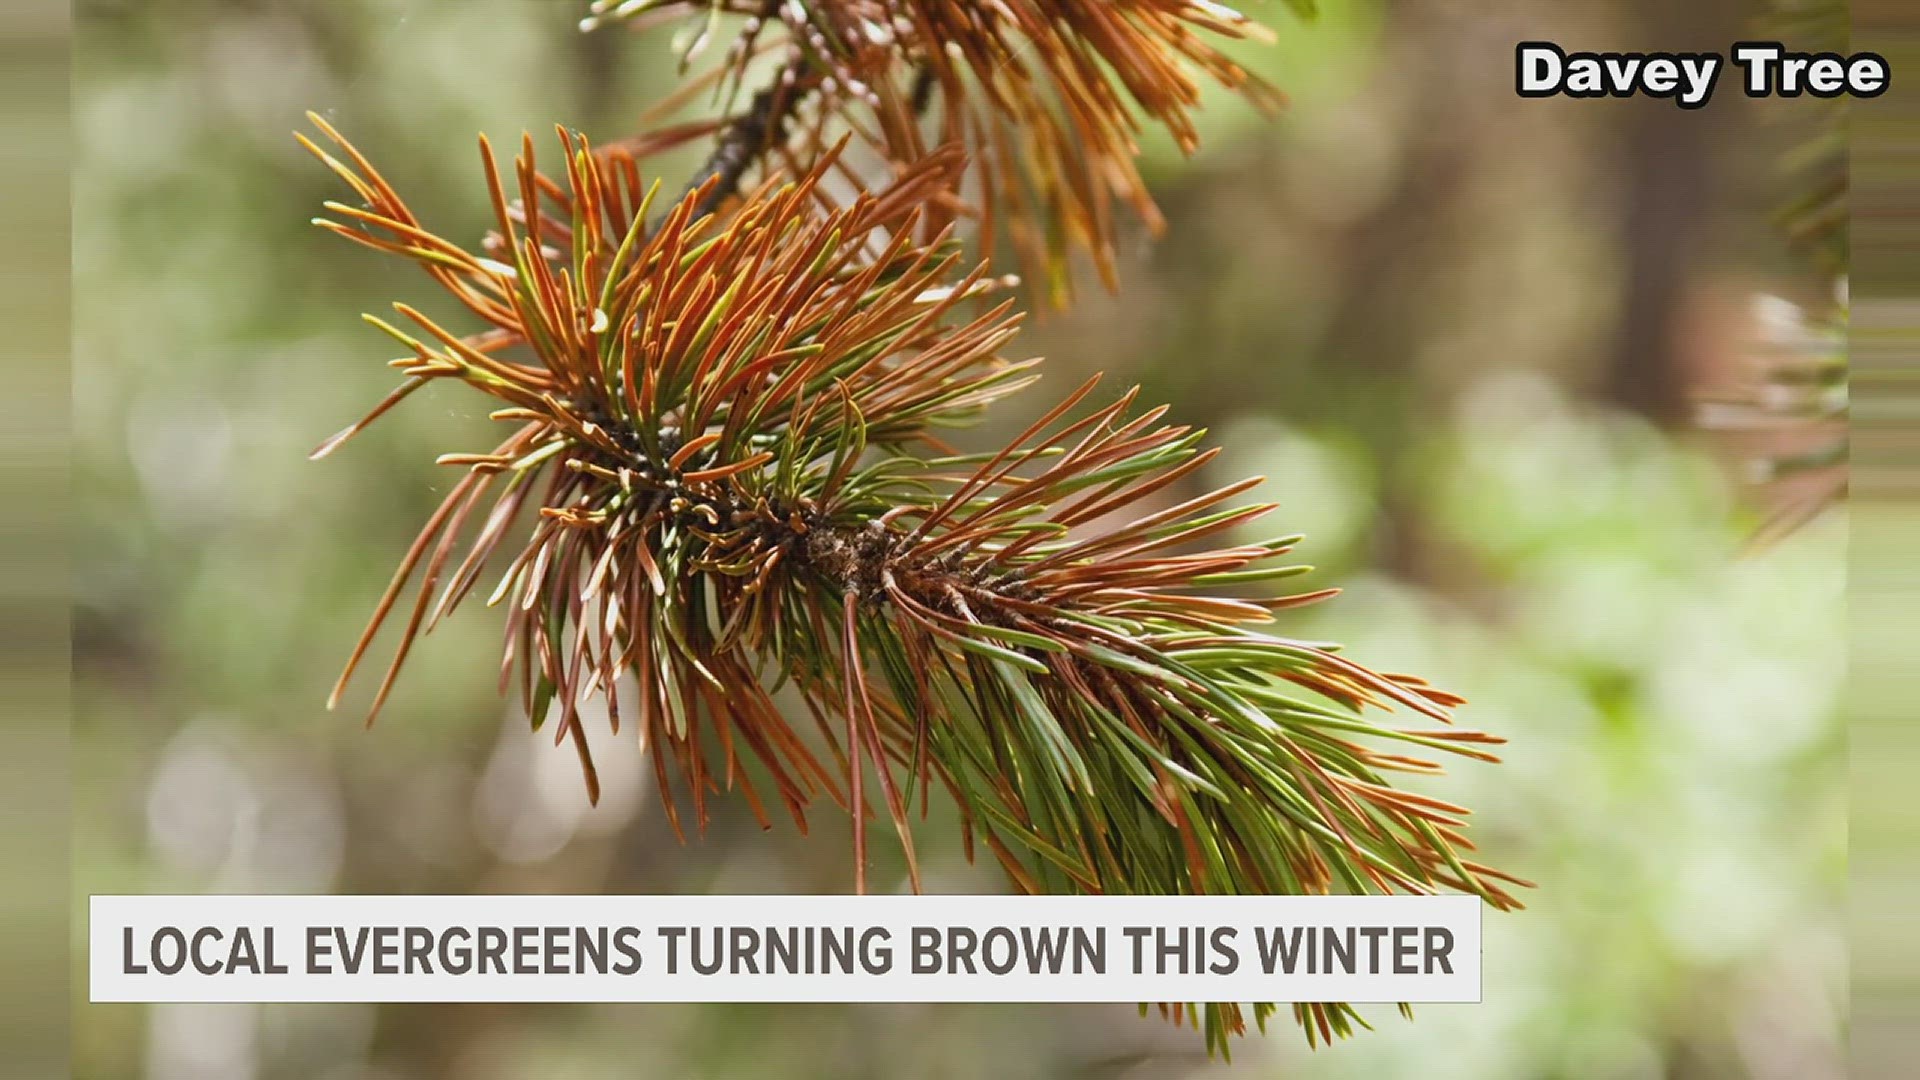 If you're noticing brown and yellow needles on your evergreens, check out these tips on bringing your tree back to life this winter.